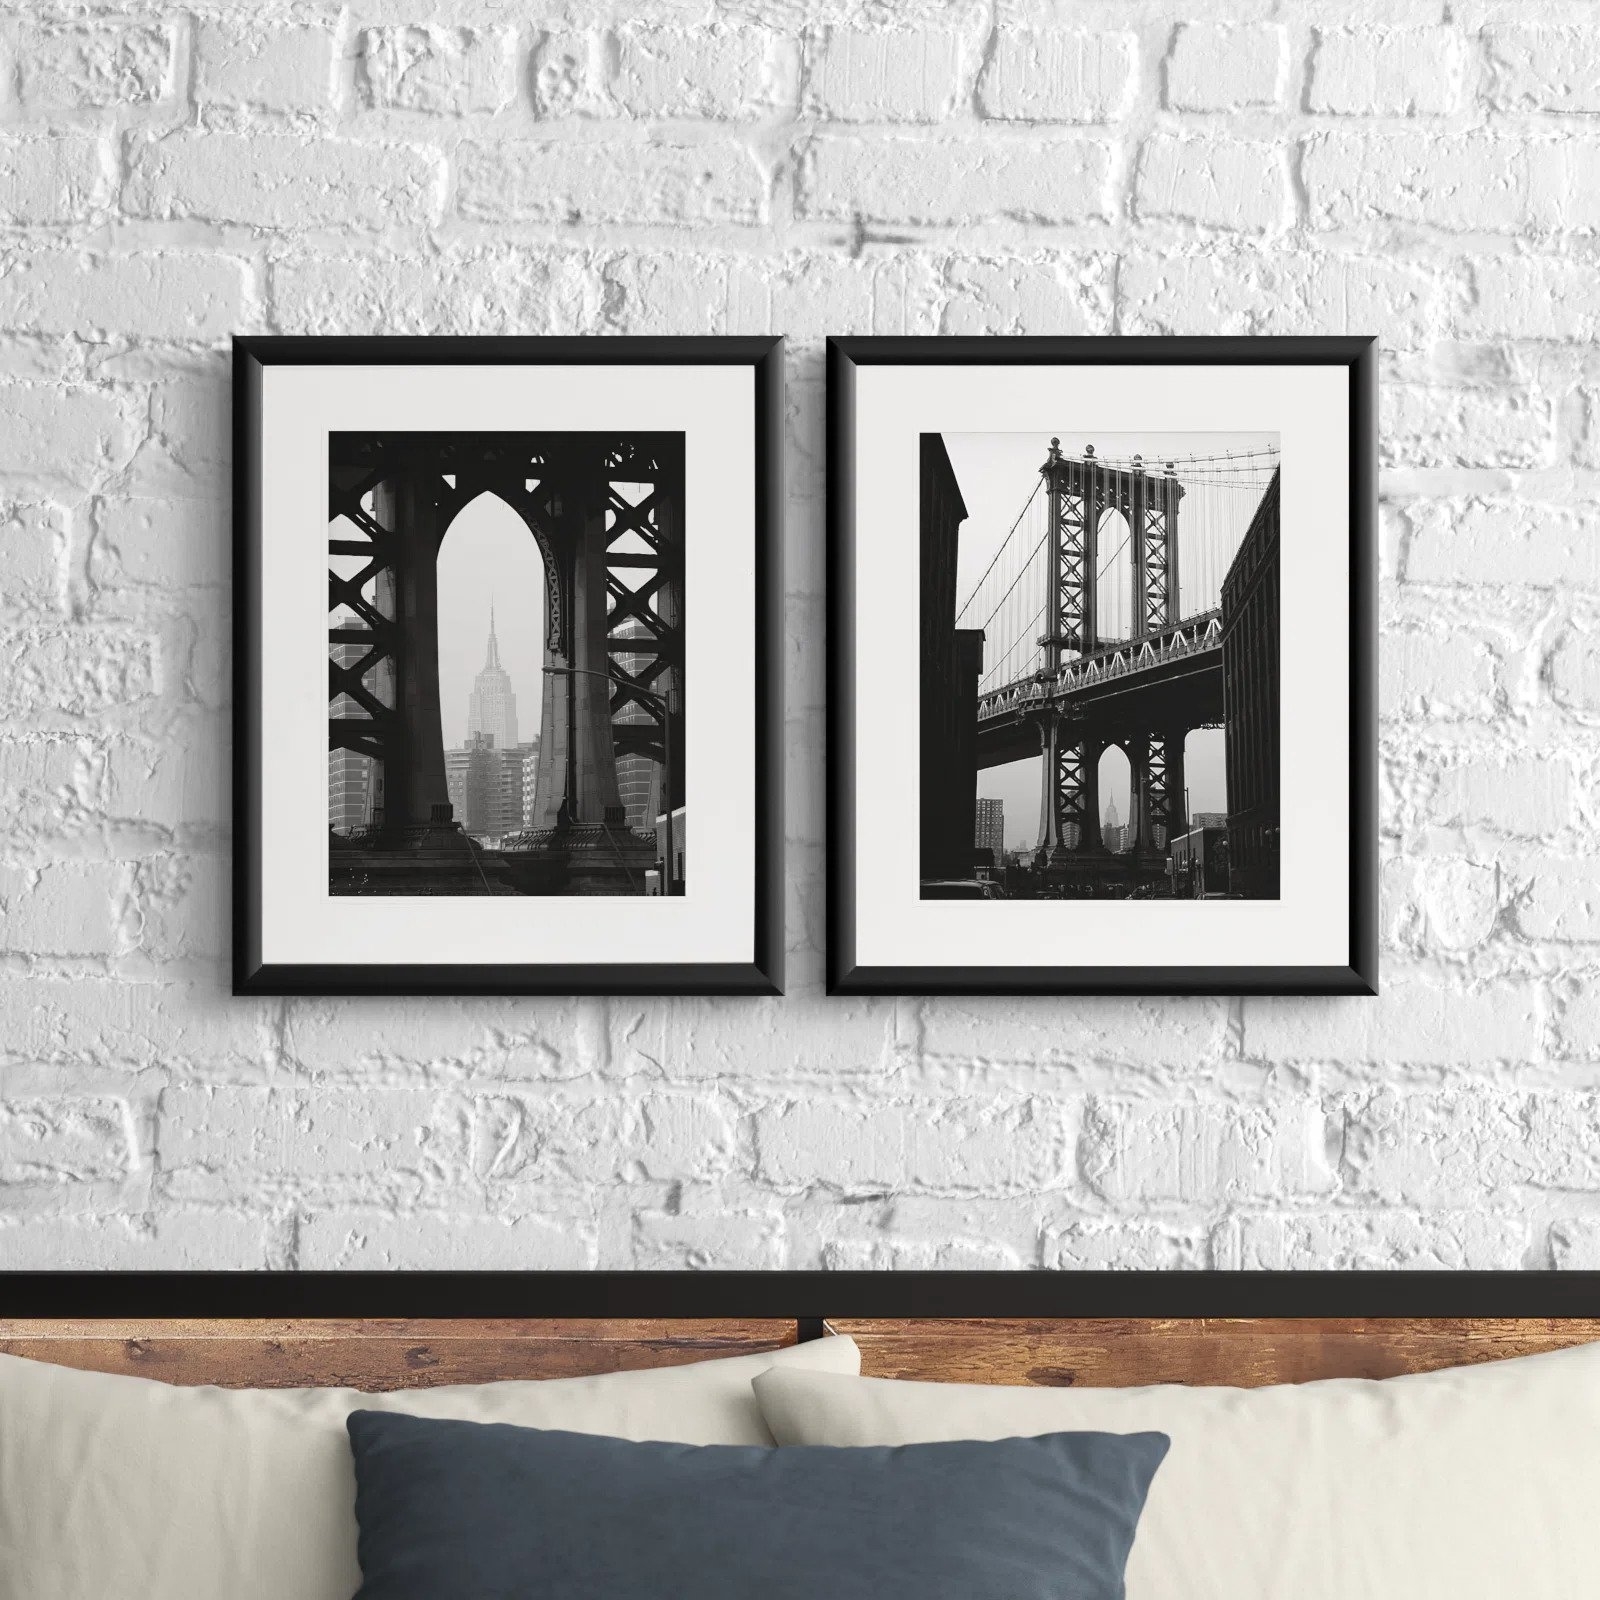 The framed prints side by side showing NYC icons: the Empire State building and the Manhattan Bridge